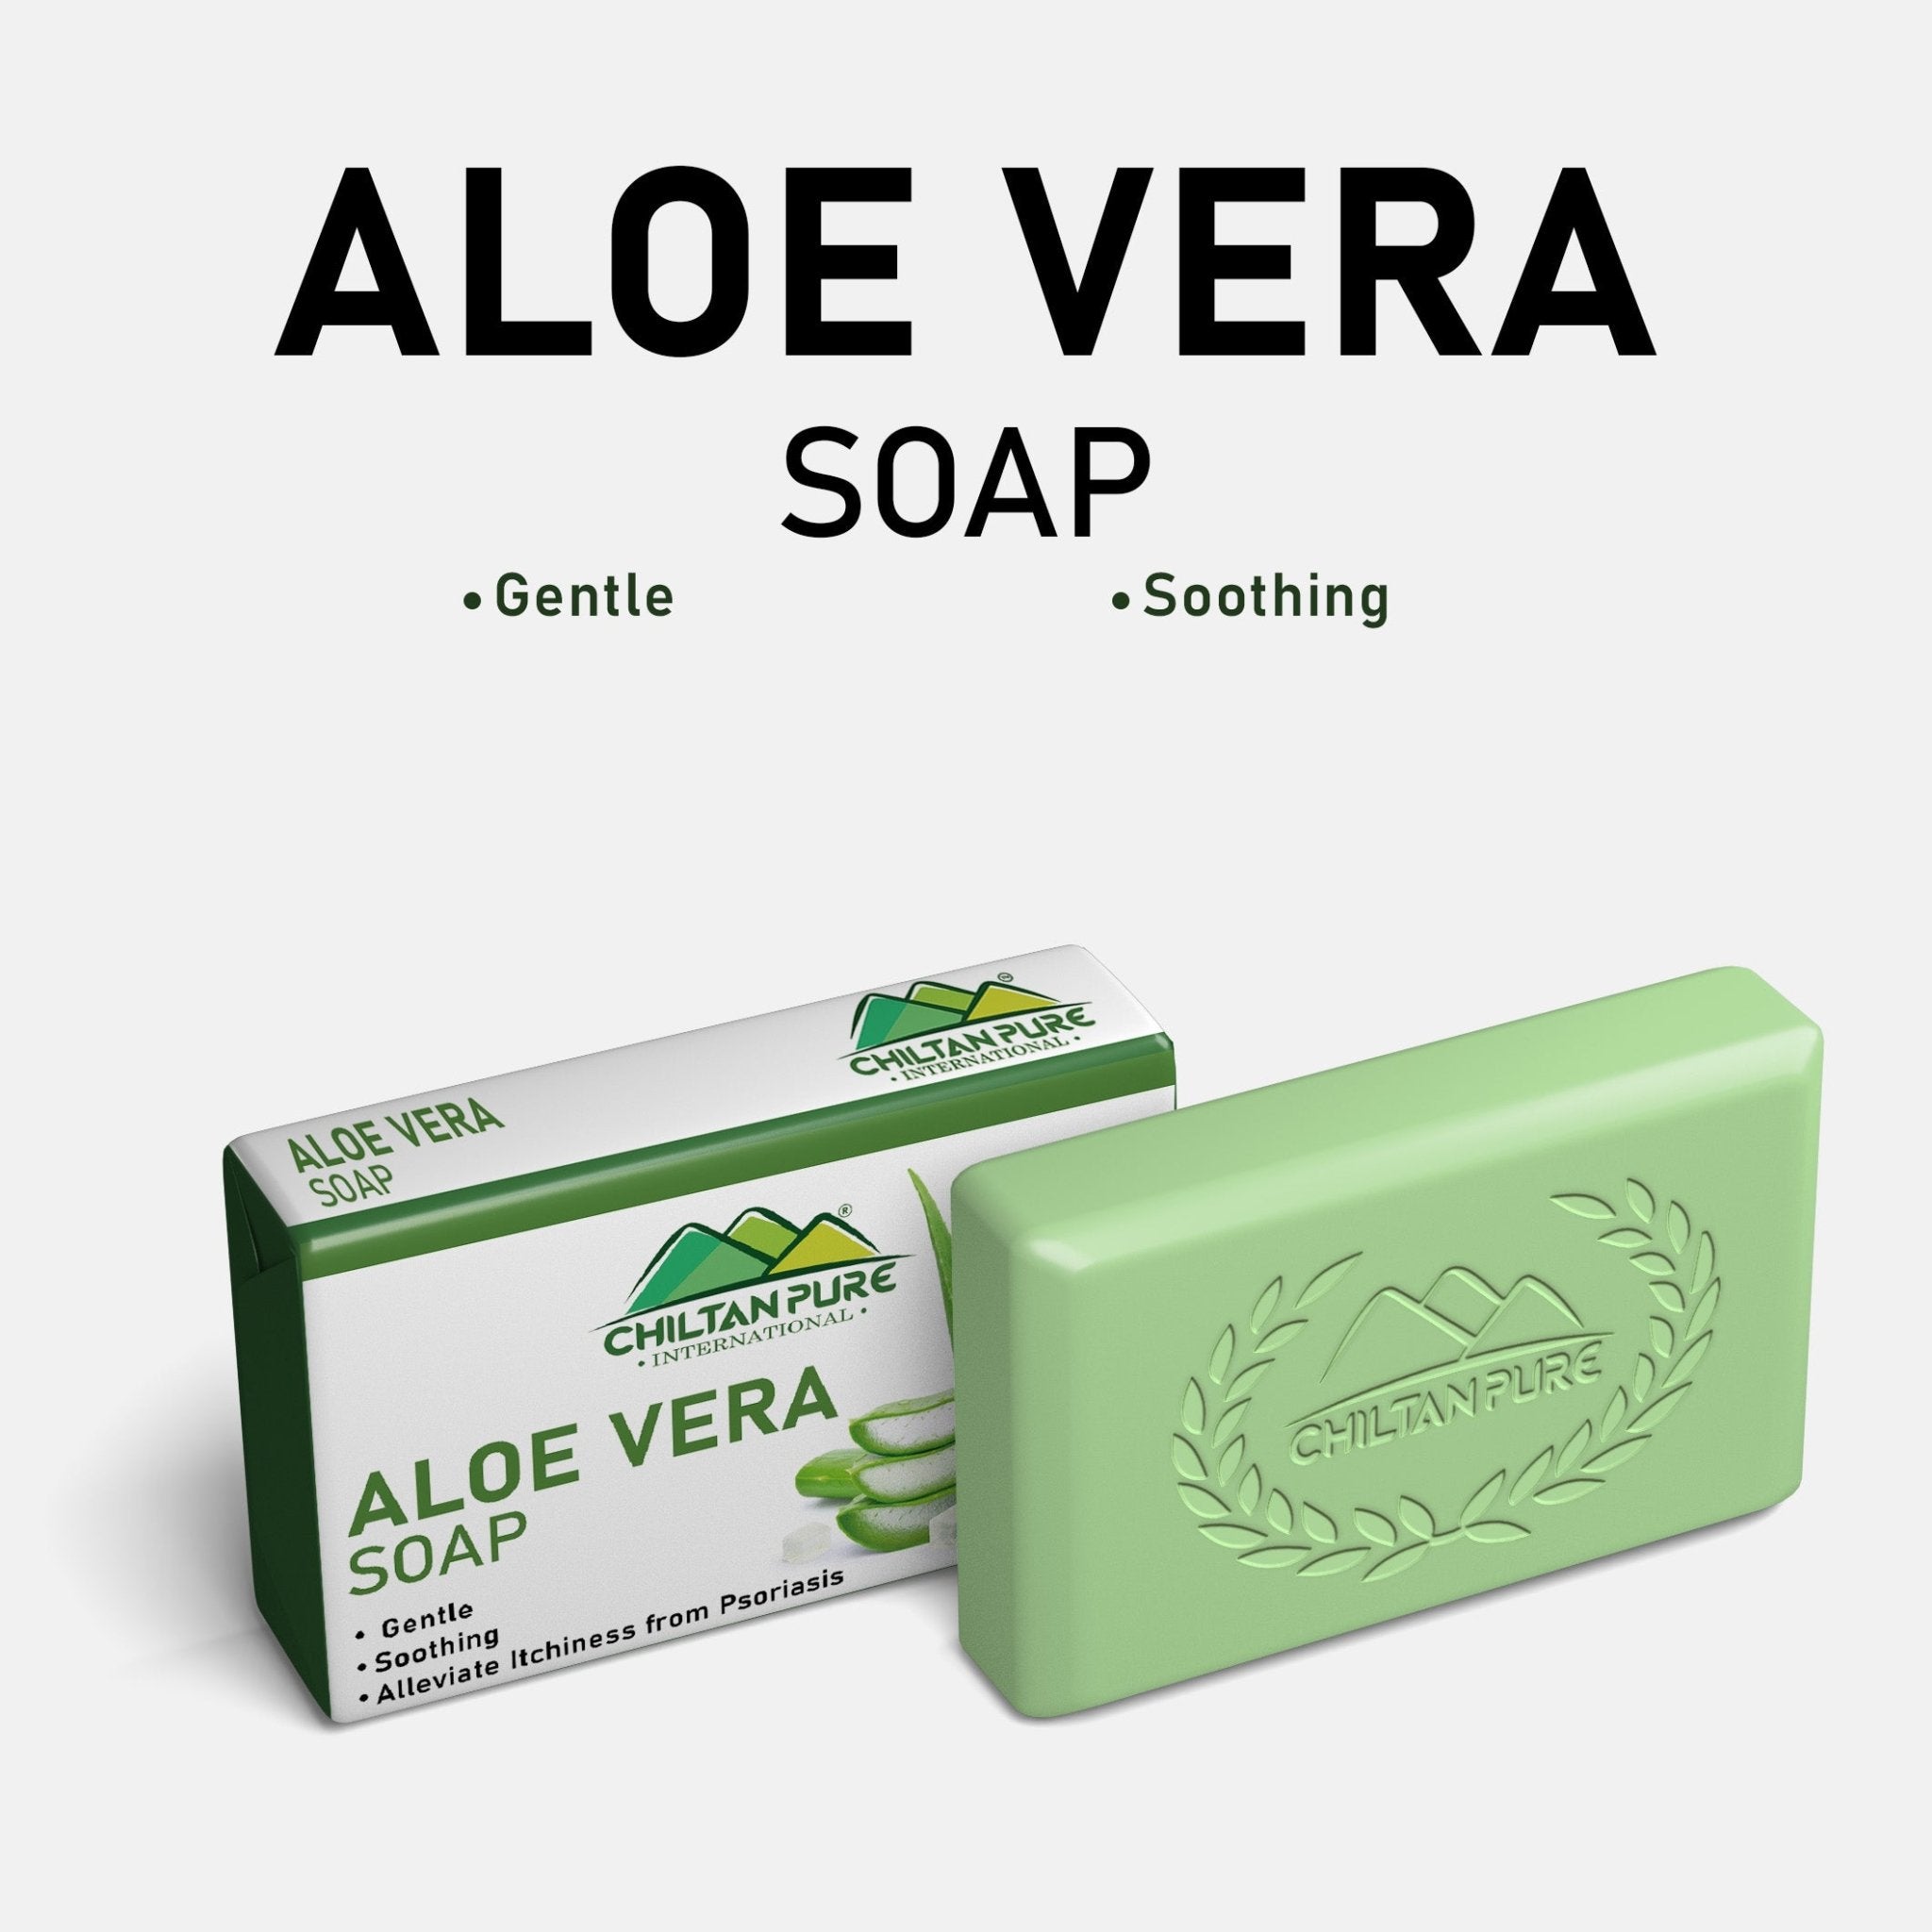 Aloe vera soap - Gentle, soothing & alleviate itchiness from psoriasis - ChiltanPure